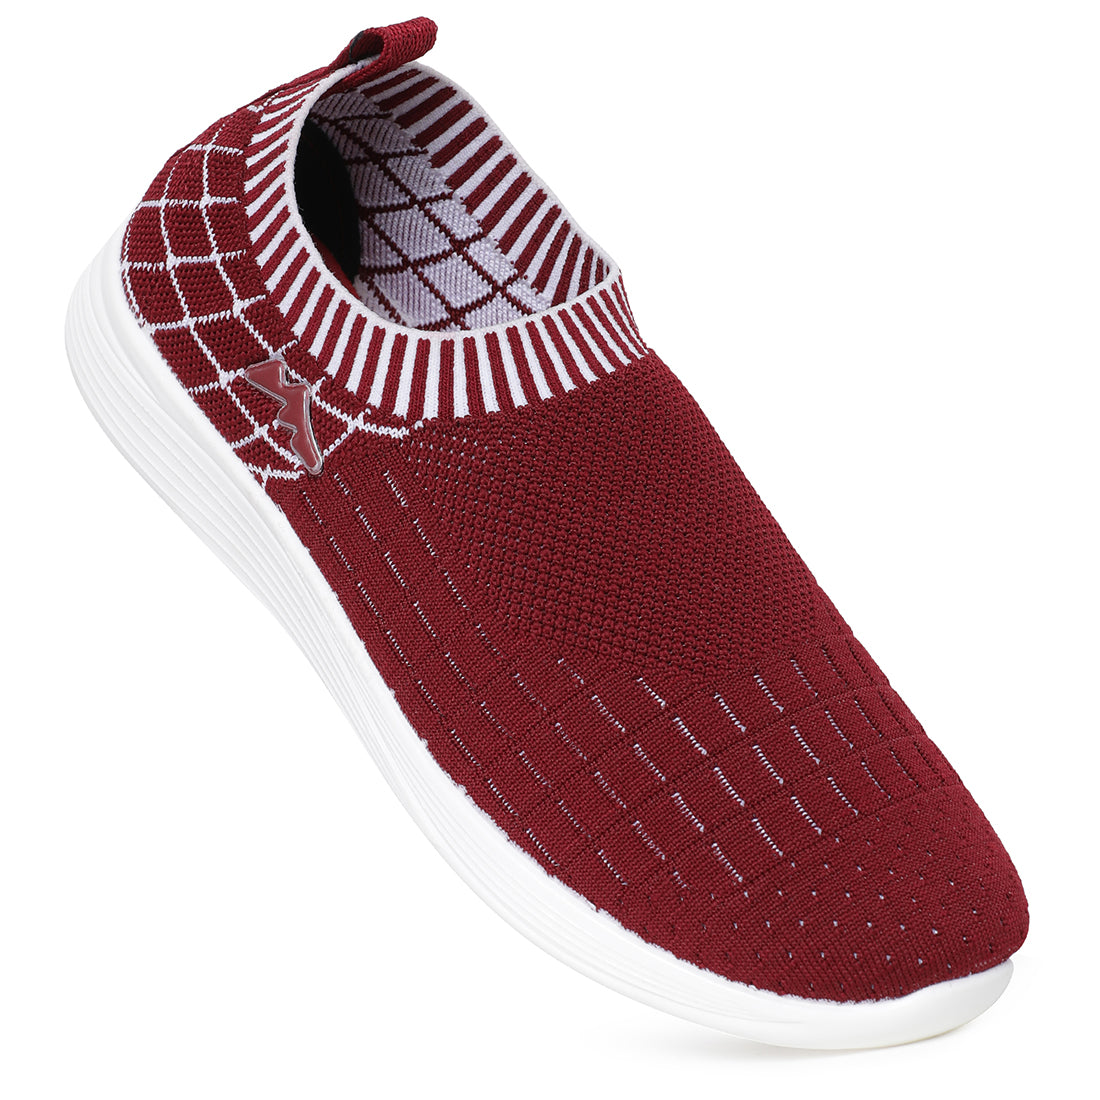 Stimulus PUSTL5021AP Maroon Stylish Daily Comfortable Casual Shoes For Women